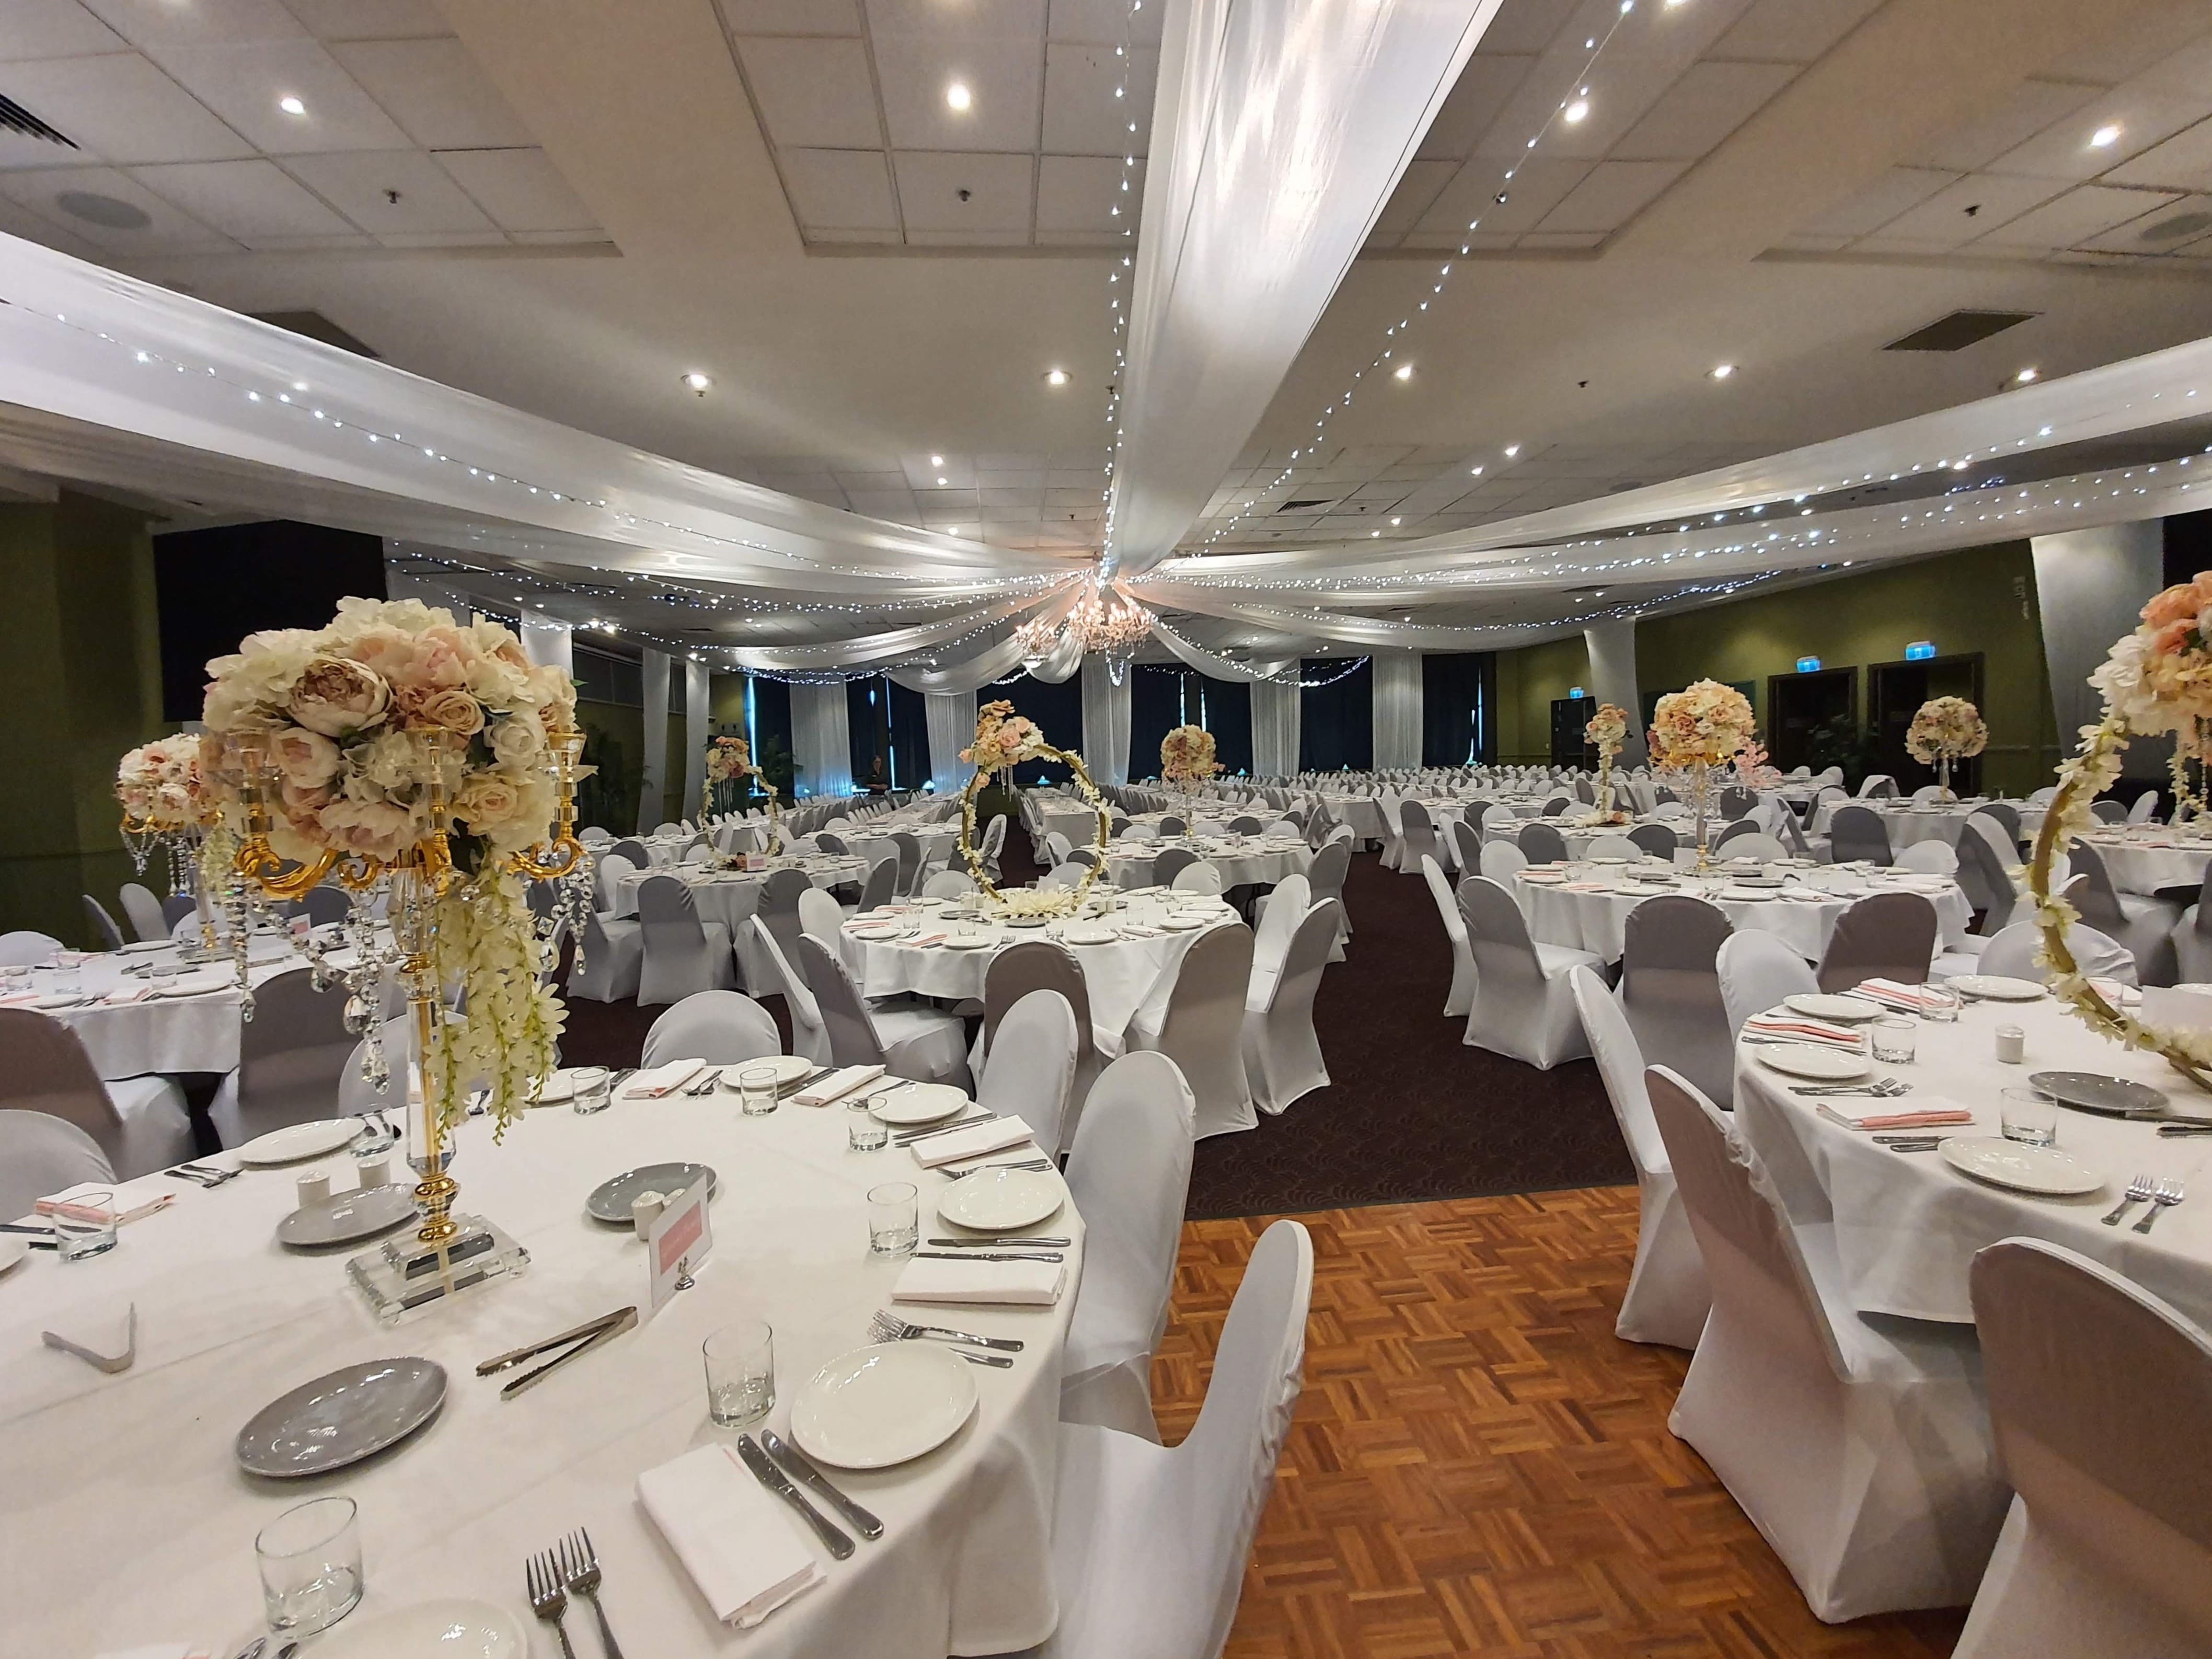 Star ceiling canopy white & fairy lights, crystal chandeliers, white chair covers